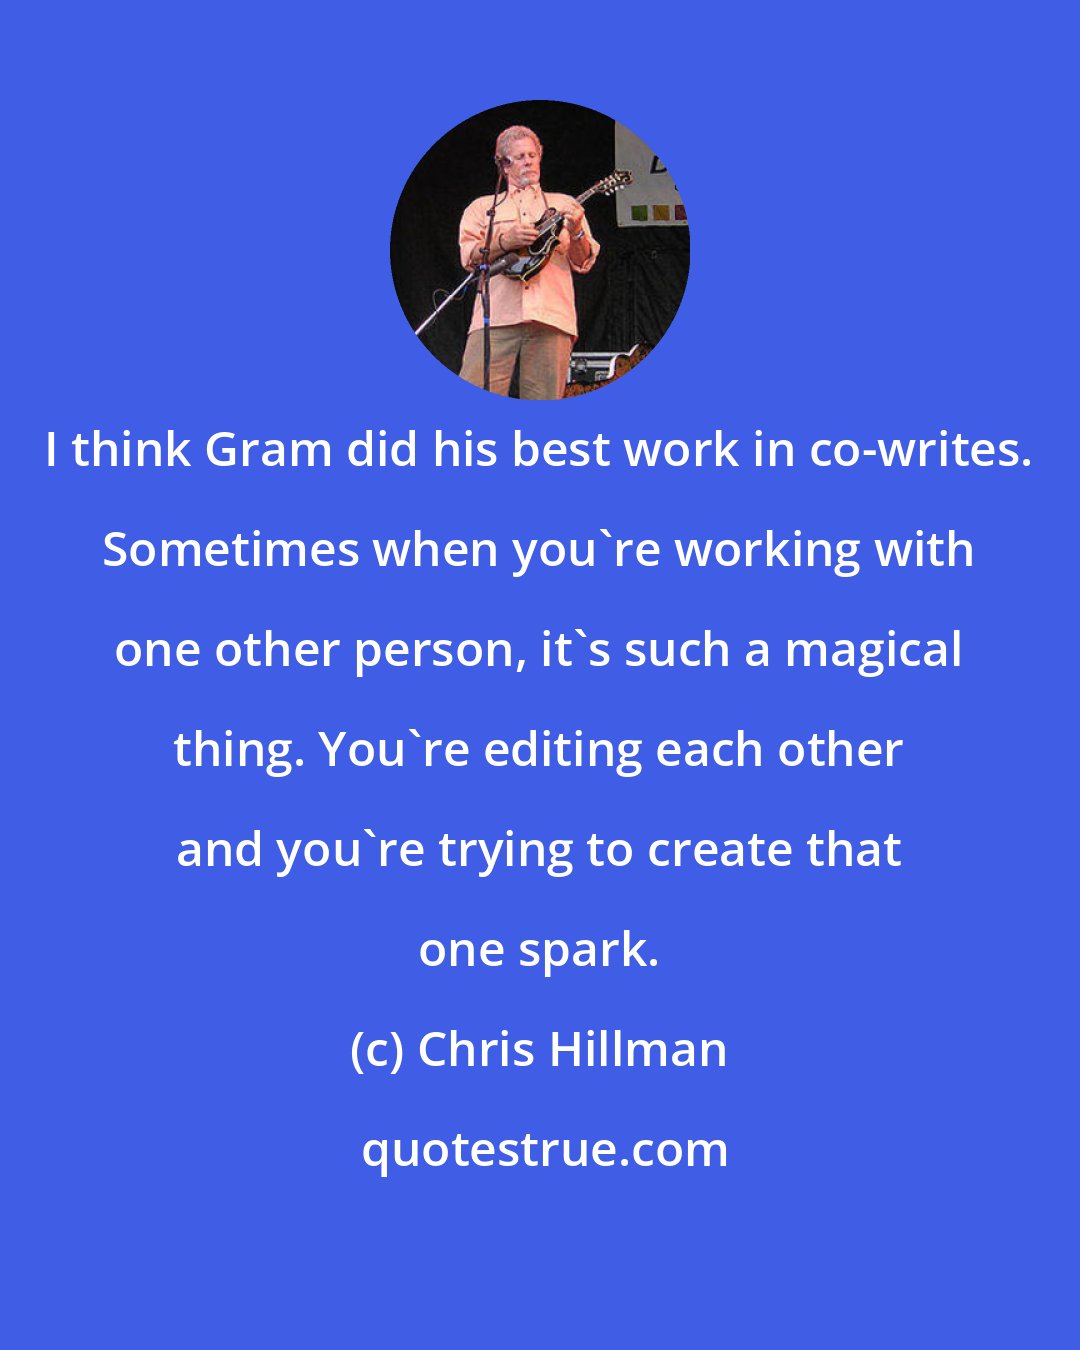 Chris Hillman: I think Gram did his best work in co-writes. Sometimes when you're working with one other person, it's such a magical thing. You're editing each other and you're trying to create that one spark.